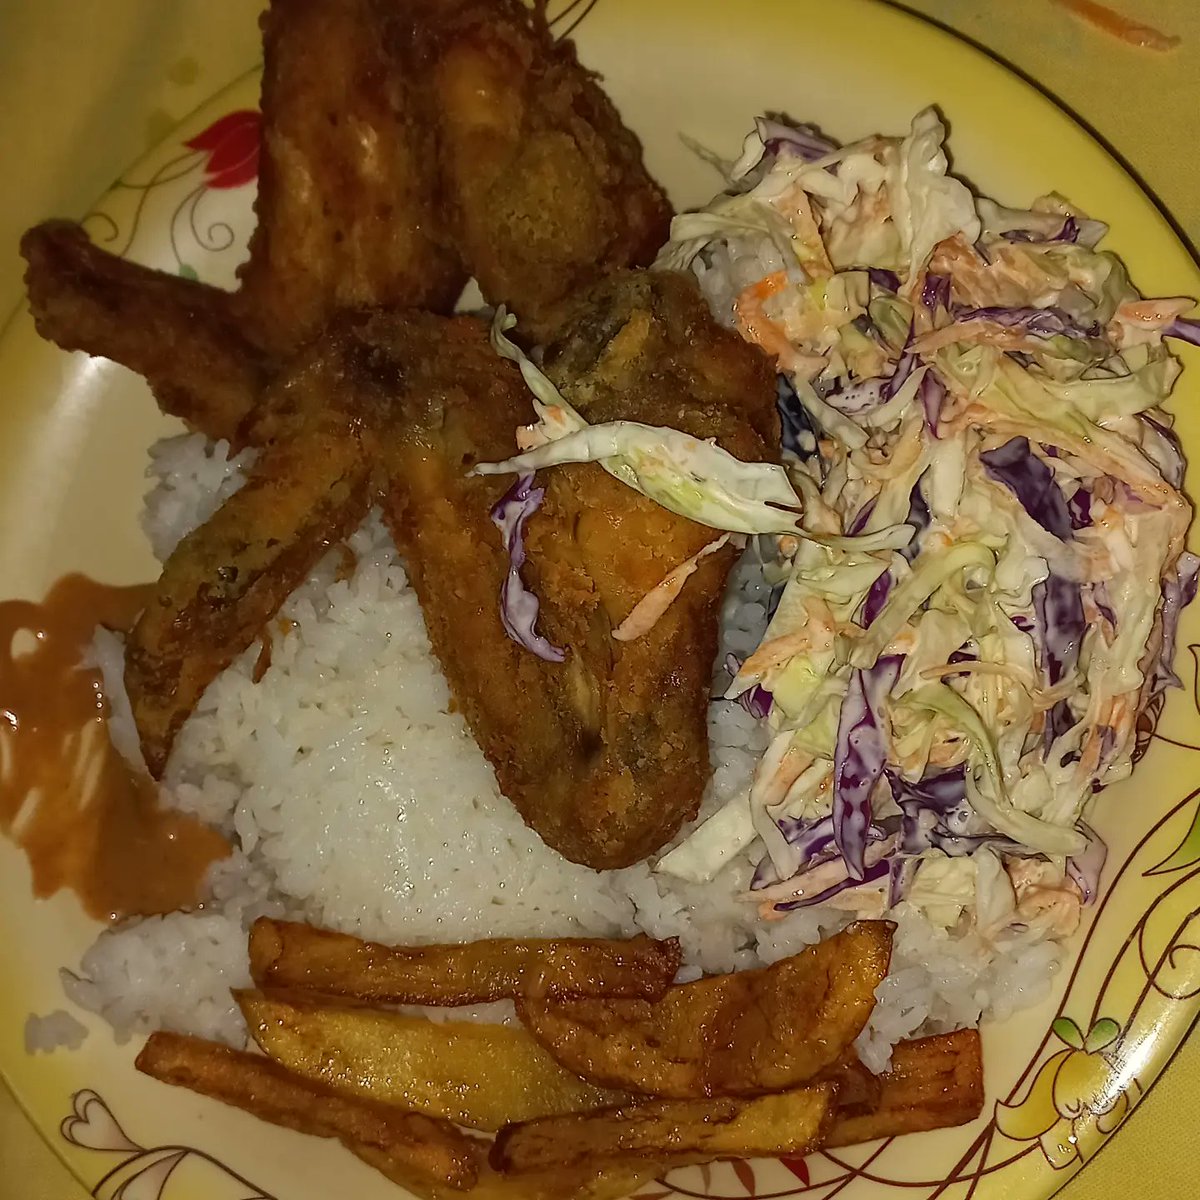 Deep Fried Chicken Wings Home made chips Coleslaw Dada's kitchen. This time I cooked without having a drink. Displine 🥷. #brokeboyscooking #welovefood #WokMasGoYet #deepfriedchicken